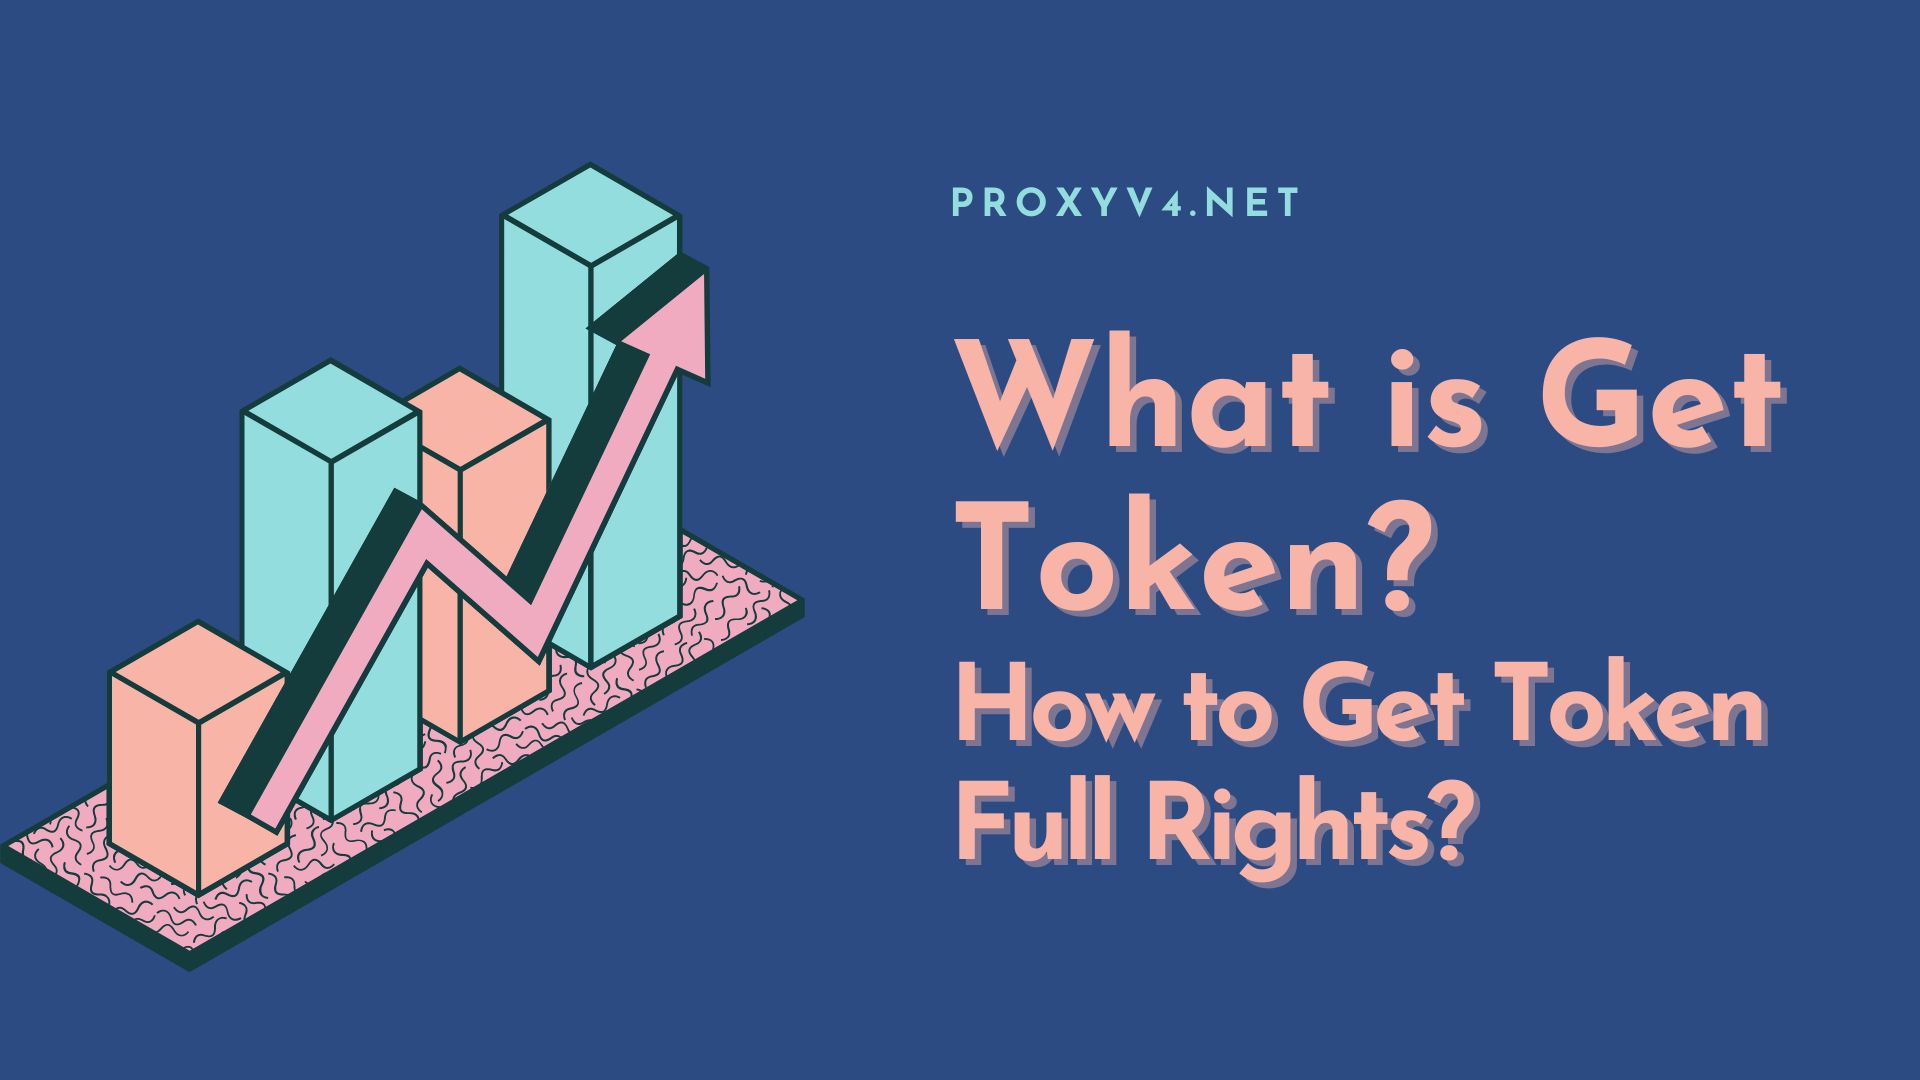 What is Get Token? How to Get Token Full Rights?